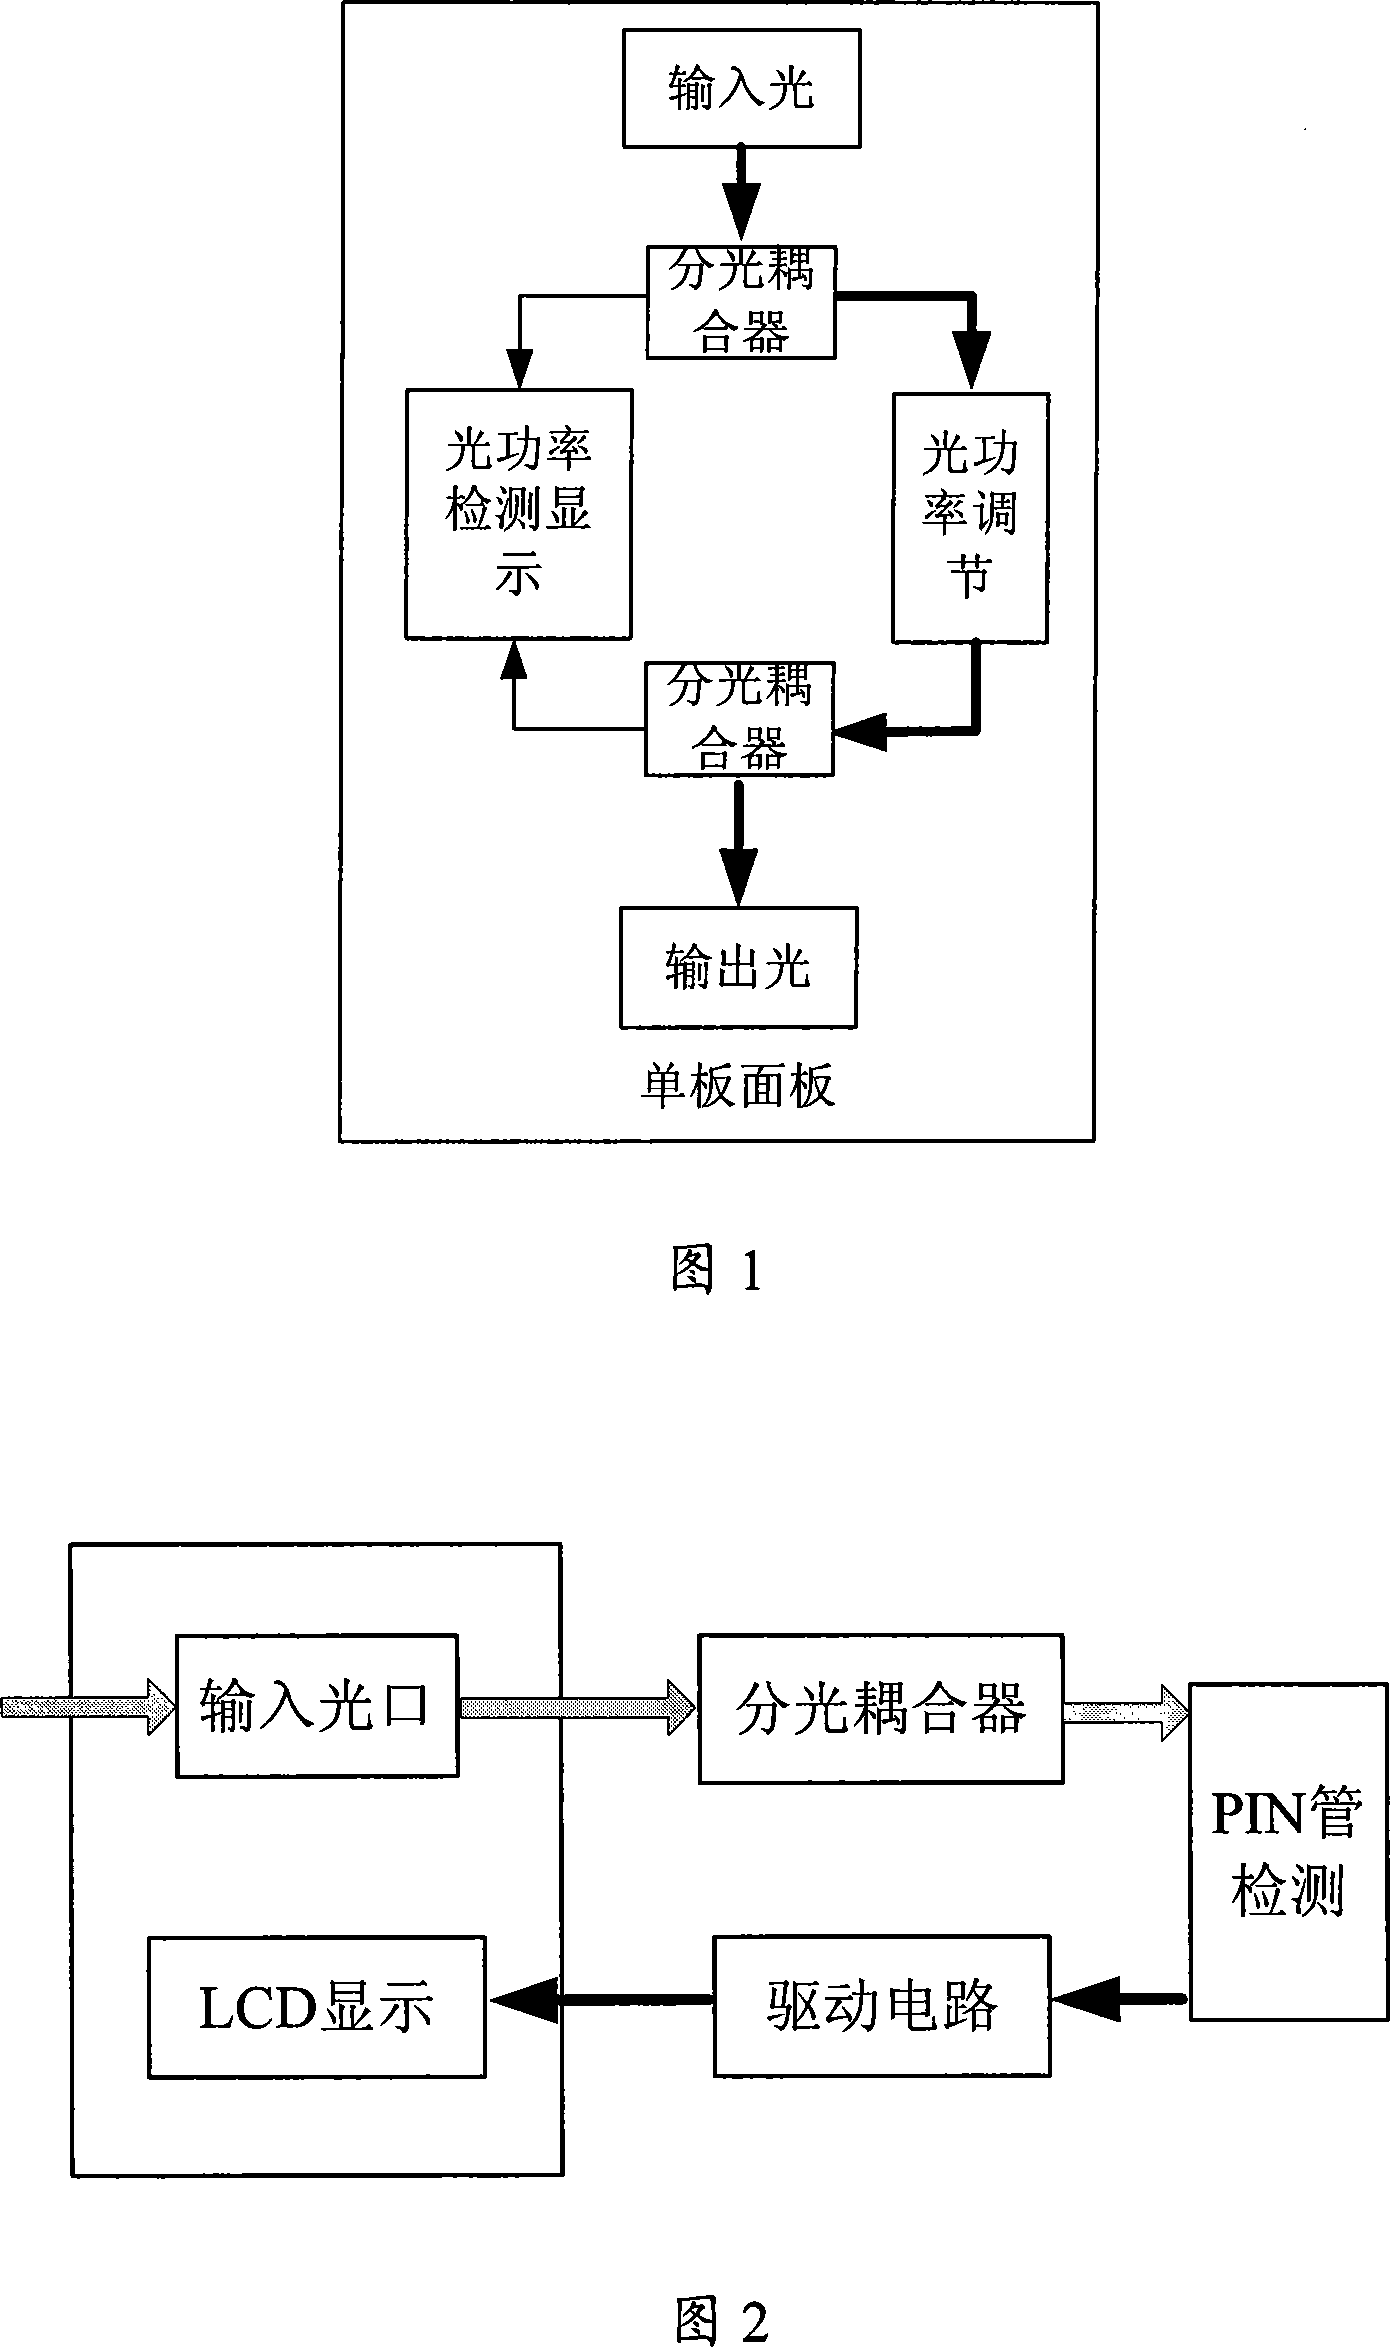 Optical power display and regulation device